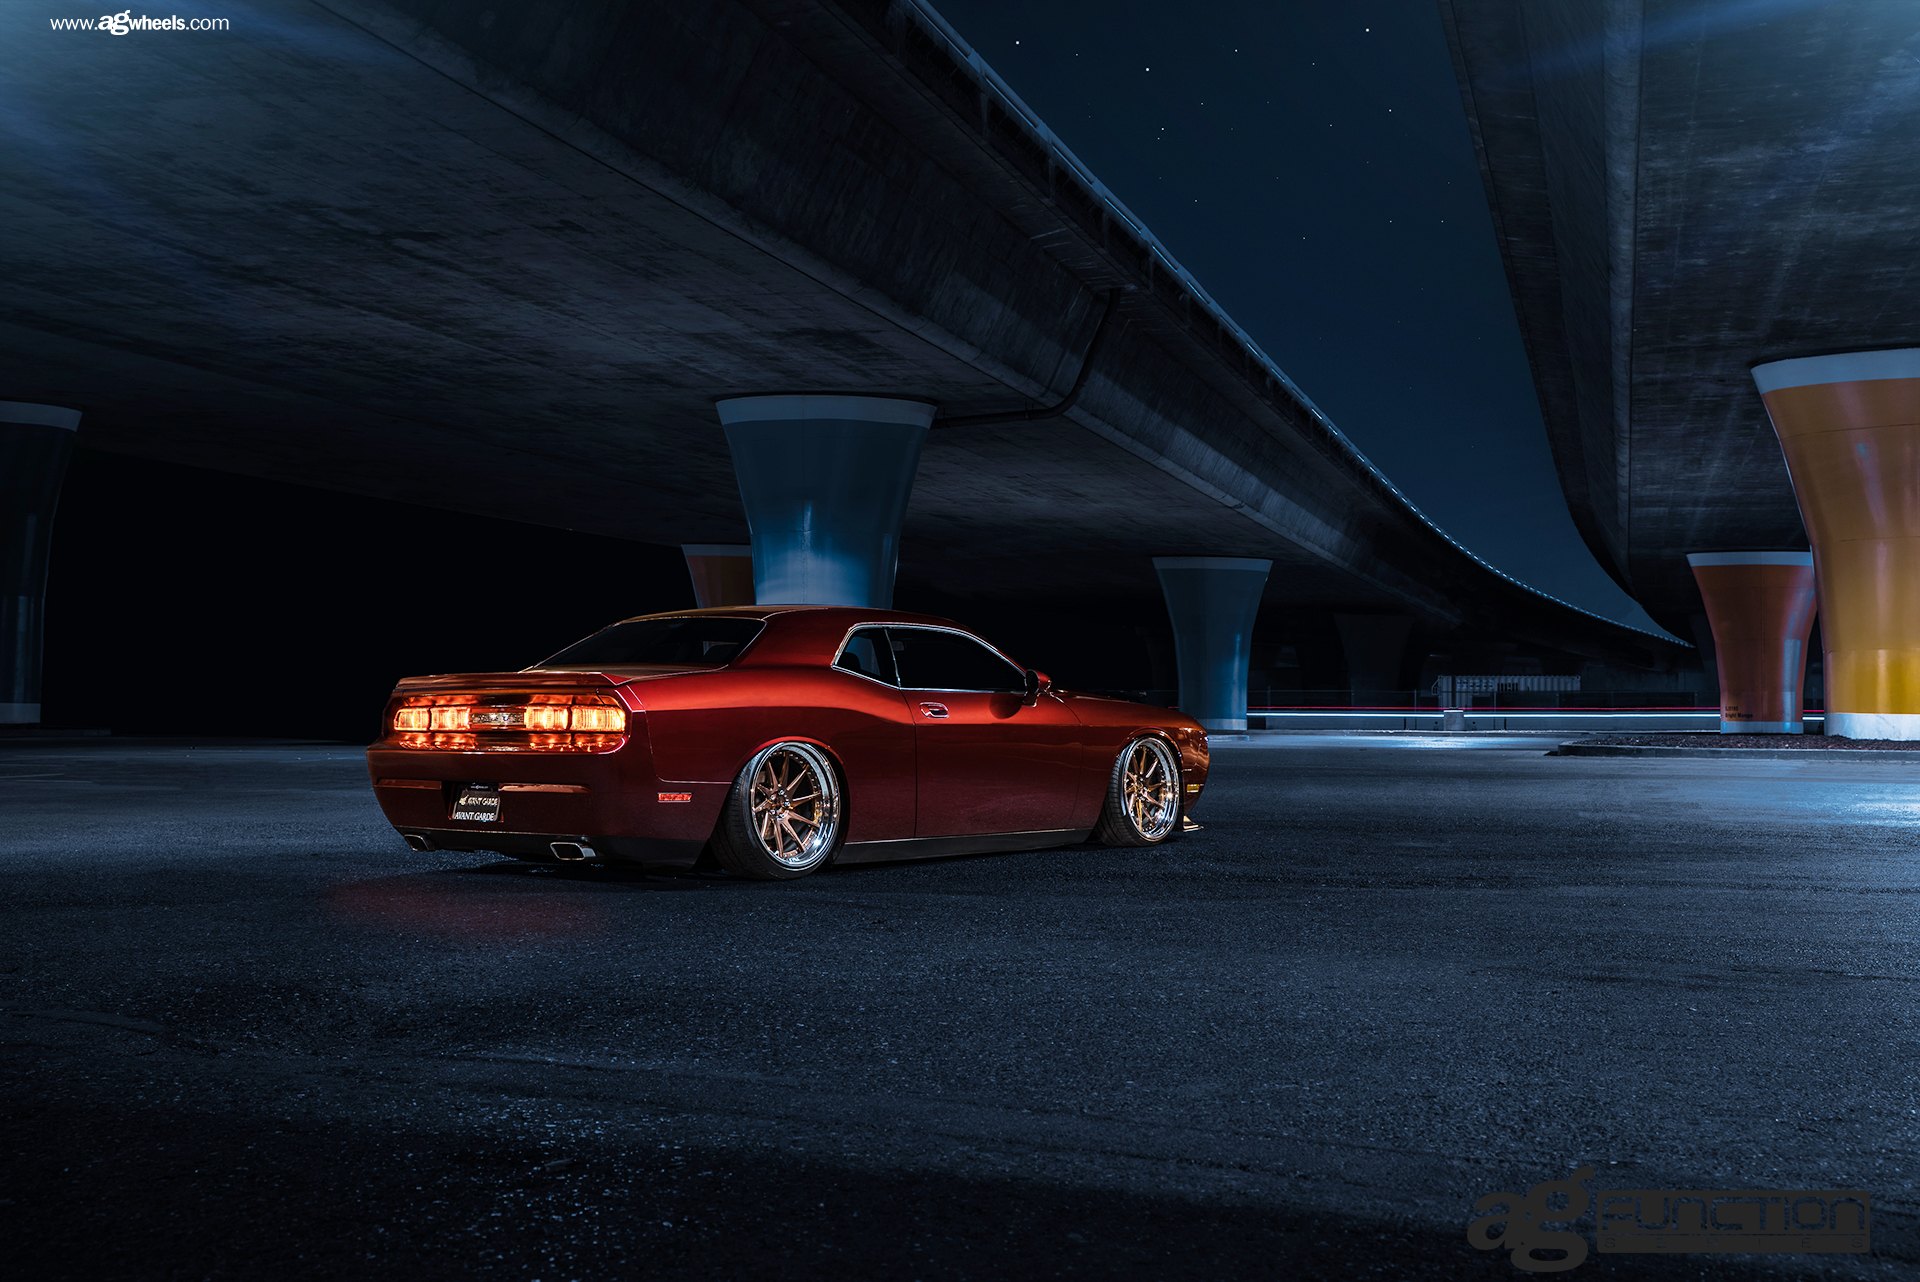 Factory Style Rear Spoiler on Red Dodge Challenger - Photo by Avant Garde Wheels